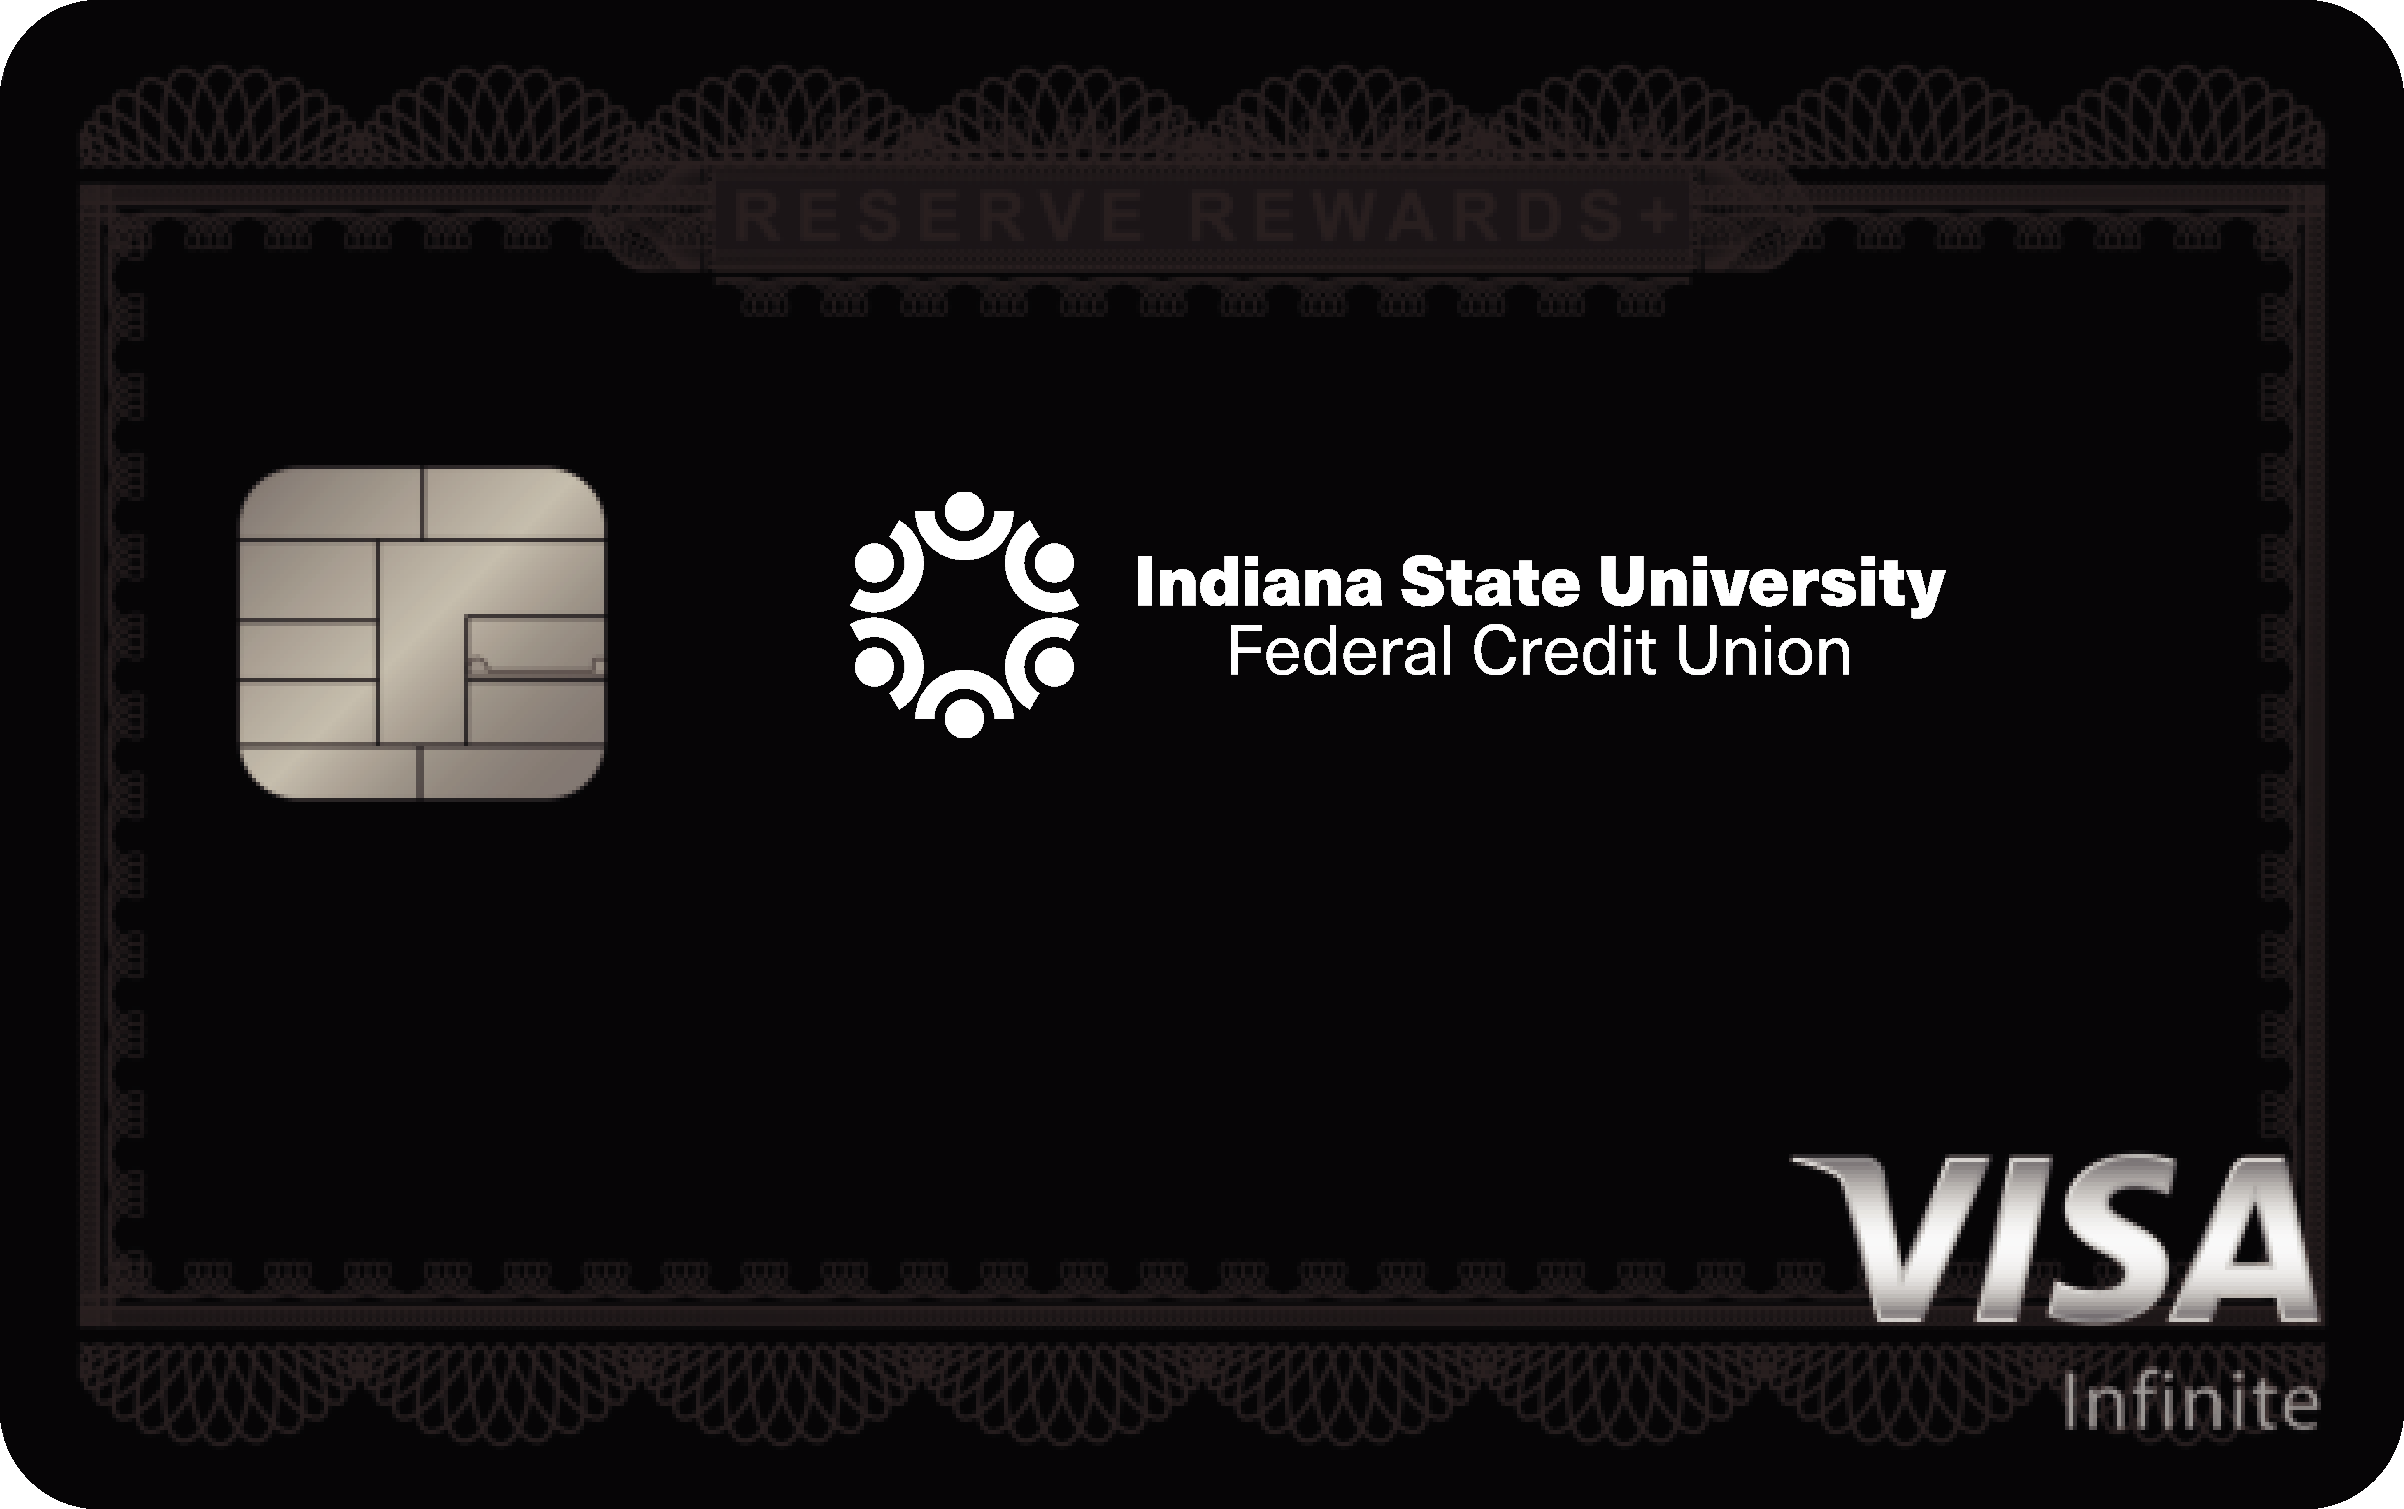 Indiana State University Federal Credit